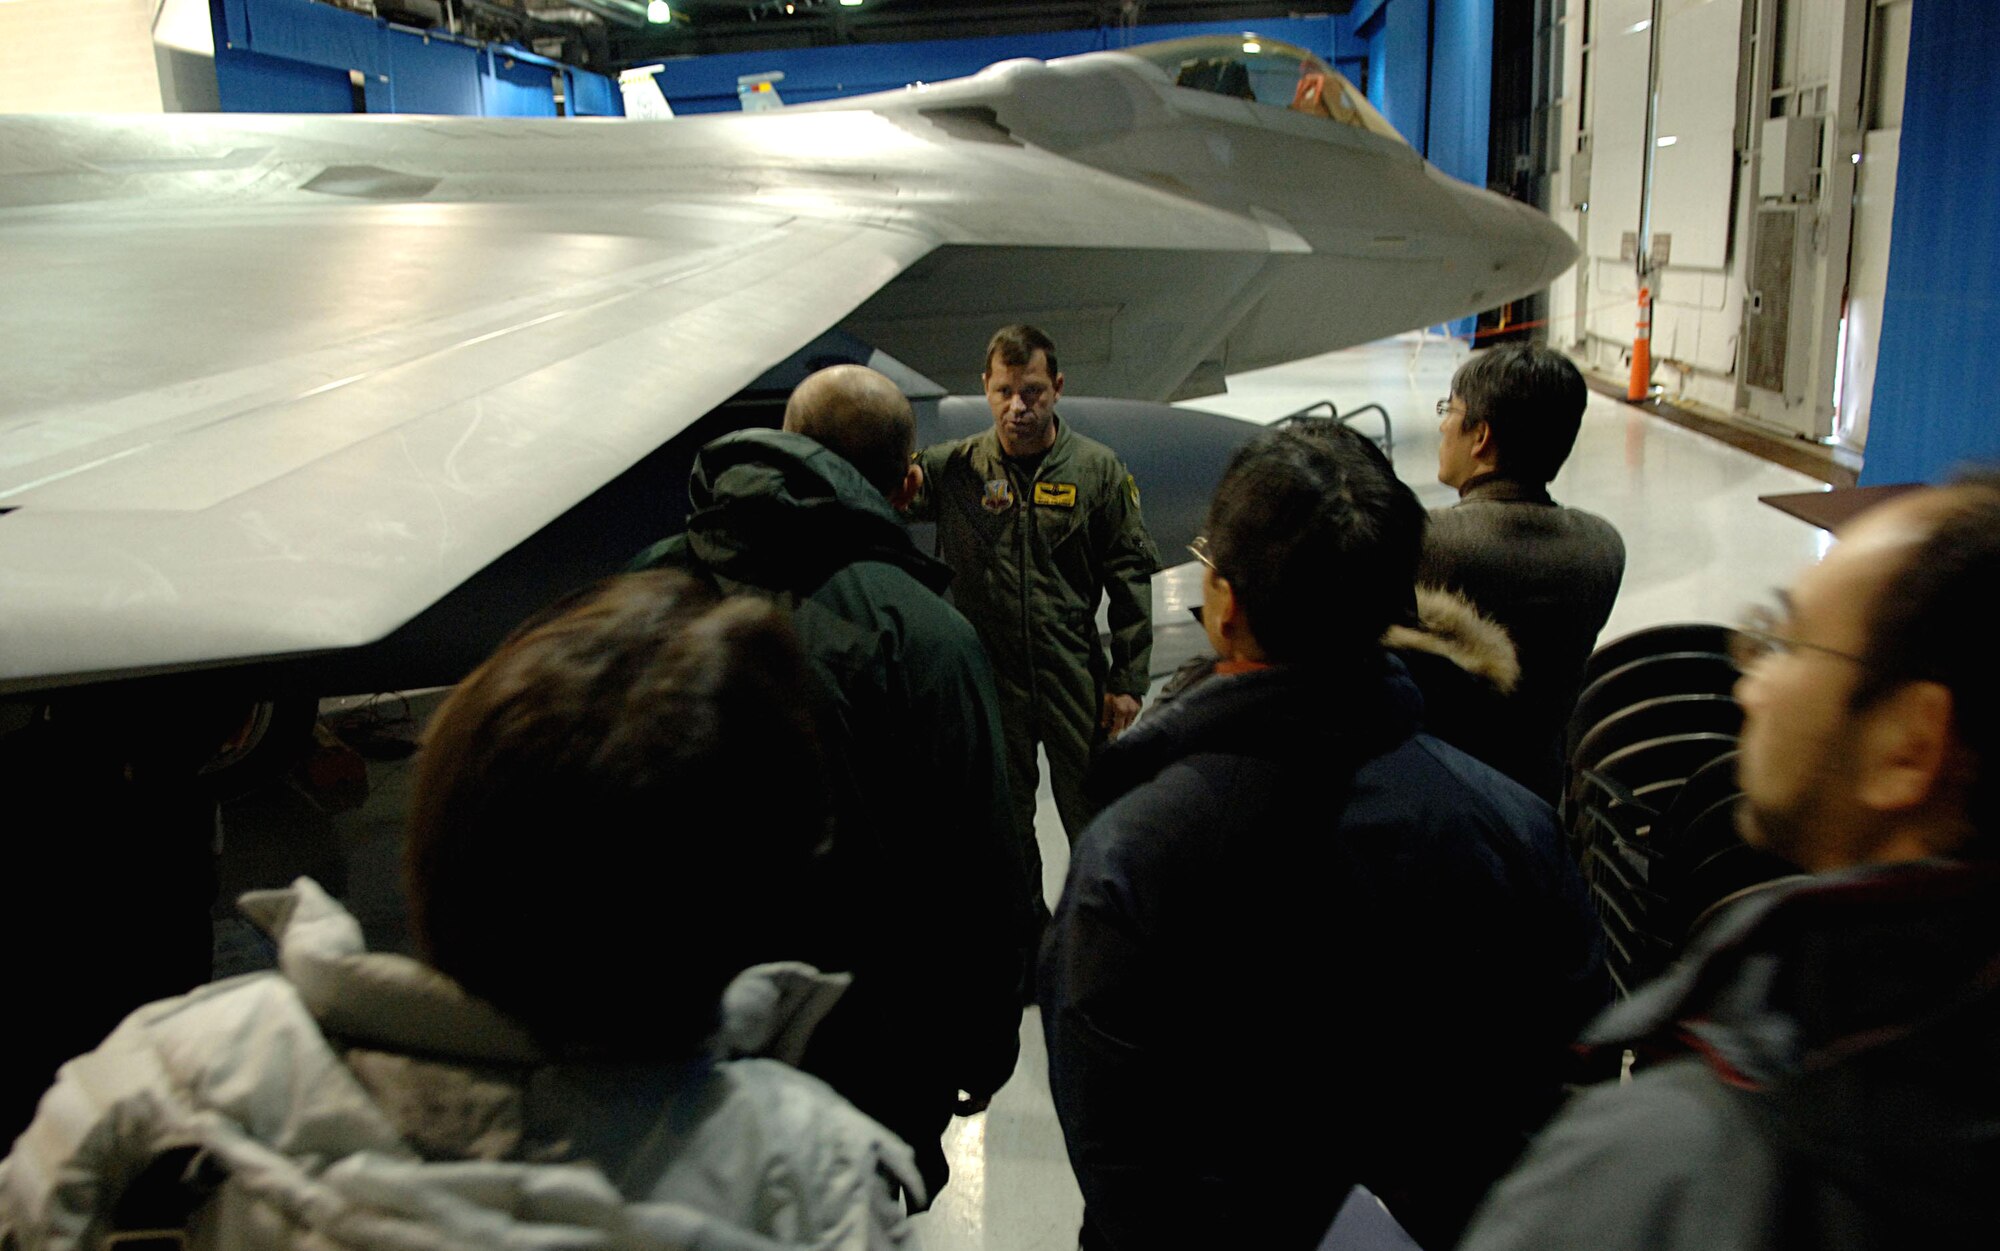 Lt. Col. Wade Tolliver explains F-22 Raptor capabilities to Japanese media during a press conference Jan. 31 with F-22 maintainers and pilots who will be deploying to Kadena Air Base later this month. The deployment to the Pacific Air Forces installation is the first real world deployment for the 27th Fighter Squadron with the Raptor. Colonel Tolliver is the squadron commander. (U.S. Air Force photo/Staff Sgt. Samuel Rogers)